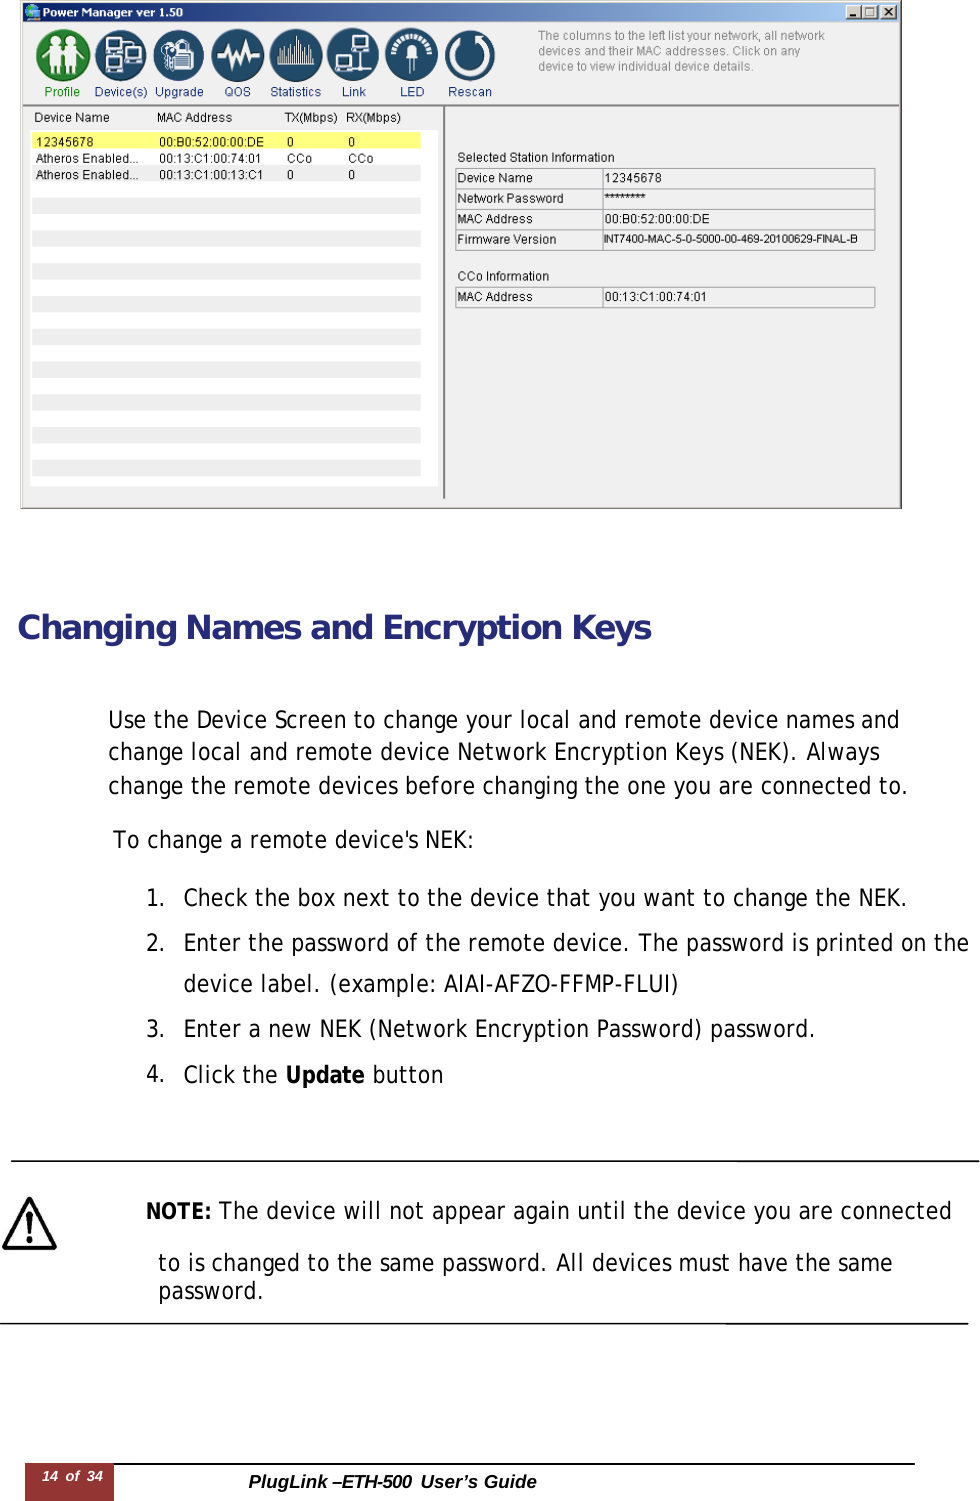 PlugLink –ETH-500  User’s Guide 14 of 34           Changing Names and Encryption Keys    Use the Device Screen to change your local and remote device names and change local and remote device Network Encryption Keys (NEK). Always change the remote devices before changing the one you are connected to.  To change a remote device&apos;s NEK:  1. Check the box next to the device that you want to change the NEK. 2. Enter the password of the remote device. The password is printed on the device label. (example: AIAI-AFZO-FFMP-FLUI) 3. Enter a new NEK (Network Encryption Password) password. 4. Click the Update button       NOTE: The device will not appear again until the device you are connected                   to is changed to the same password. All devices must have the same password. 